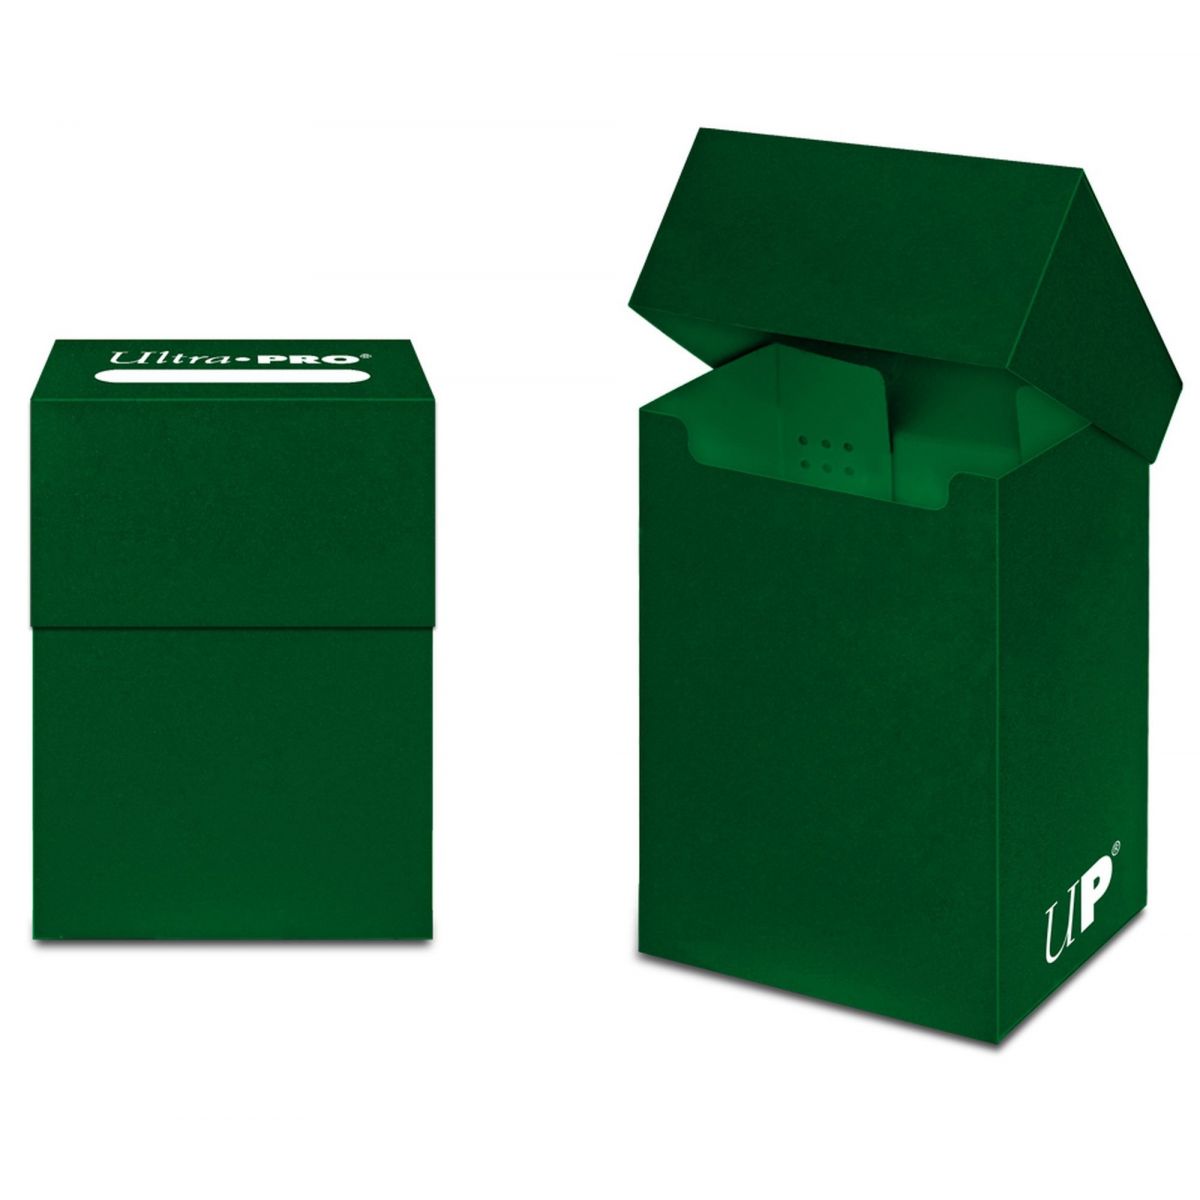 Item Ultra Pro - Deck Box Solid - Vert Foret - Green Forest 80+